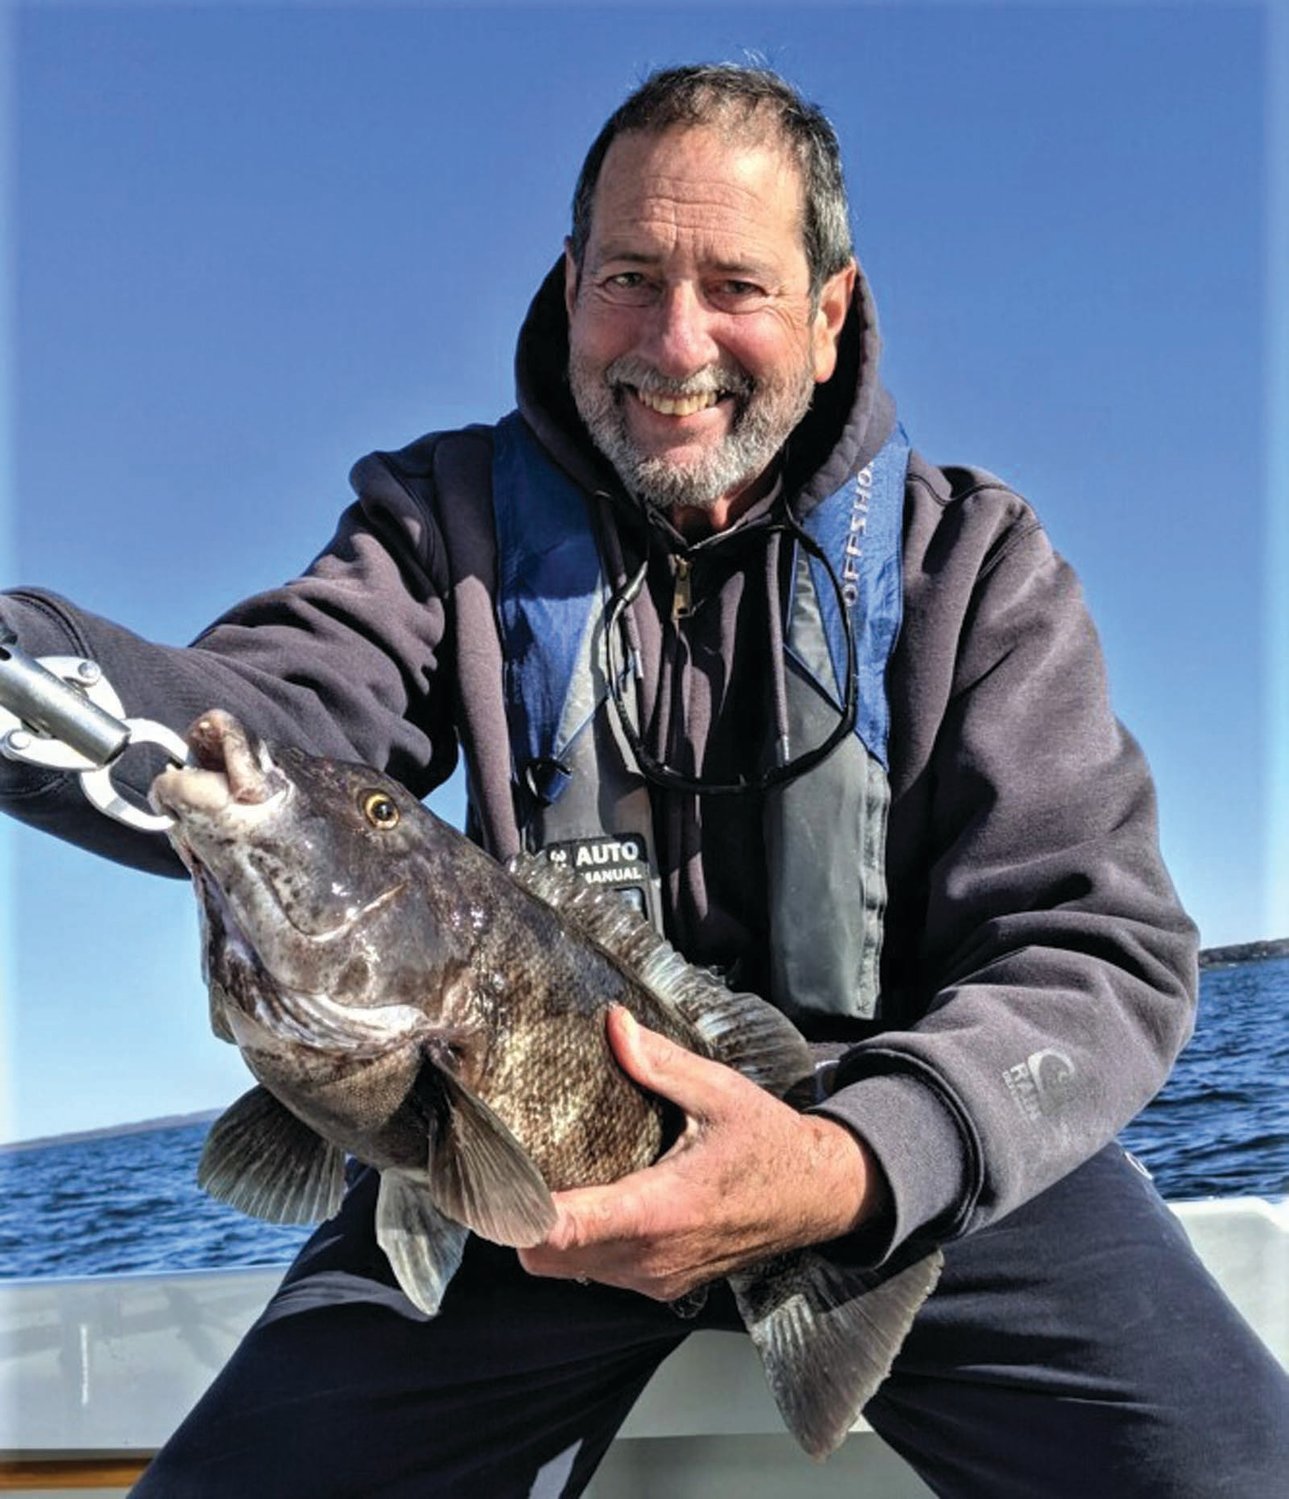 TAUTOG BITE STRONG: Capt. Dave Monti of Warwick with a healthy 5-pound tautog caught Monday at General Rock, North Kingstown.